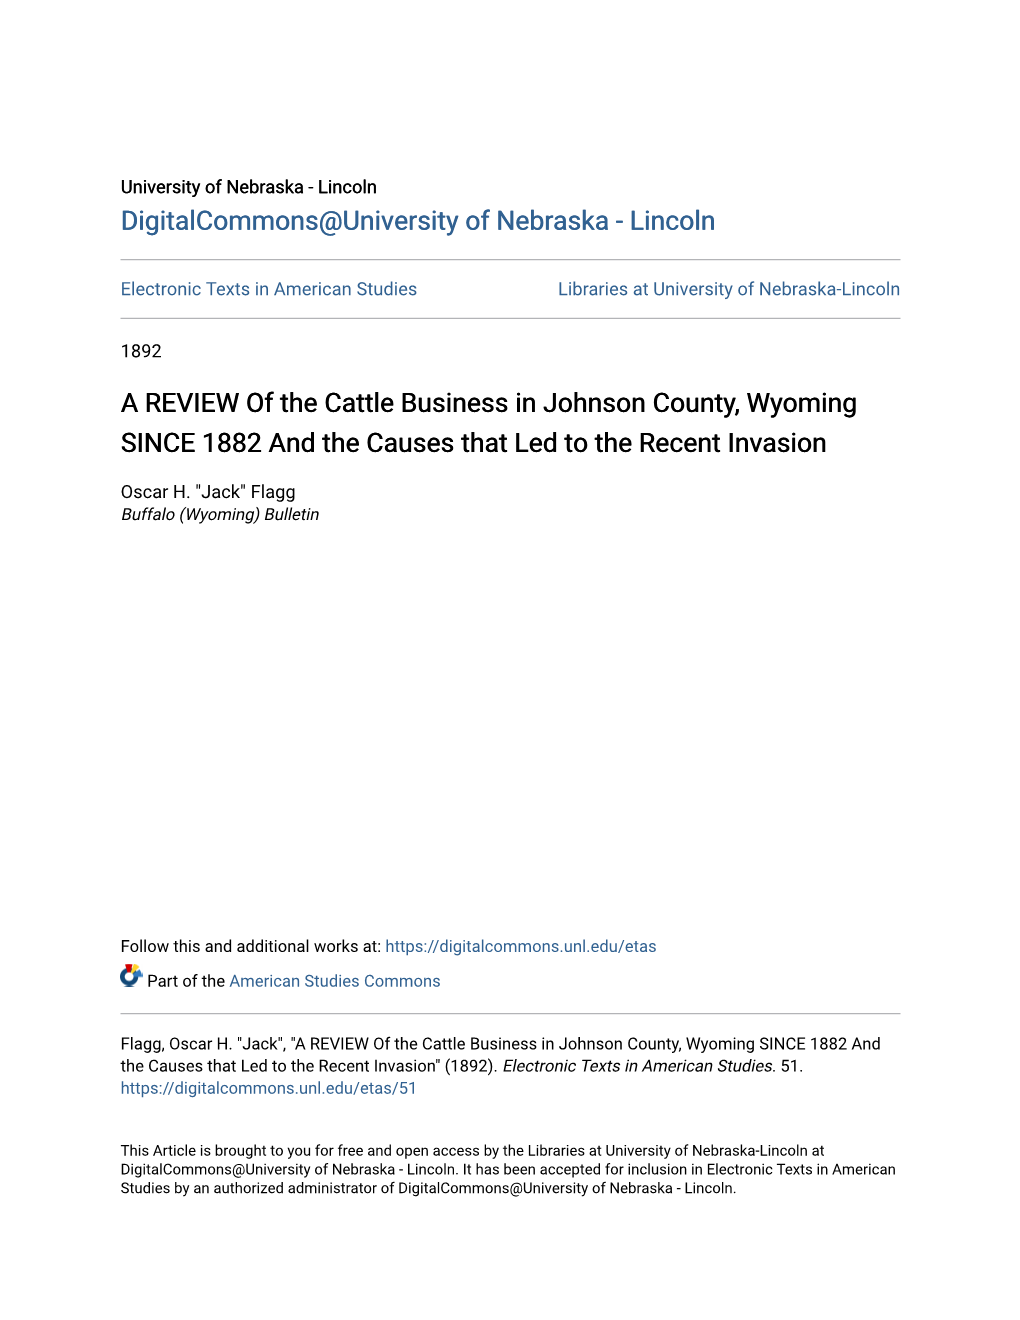 A REVIEW of the Cattle Business in Johnson County, Wyoming SINCE 1882 and the Causes That Led to the Recent Invasion